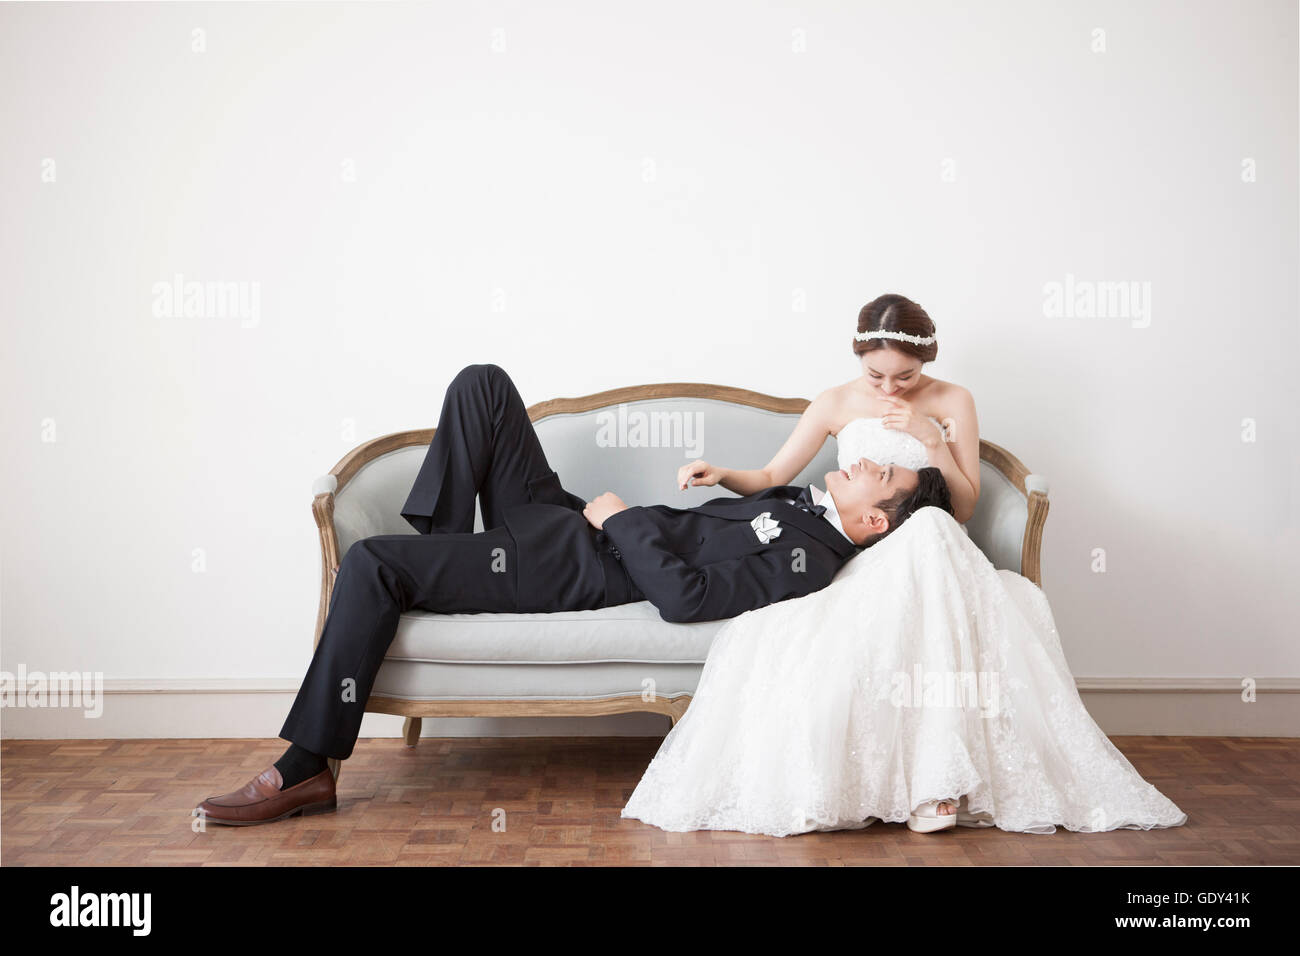 Smiling bride sitting on sofa and groom lying down on her lap Stock Photo